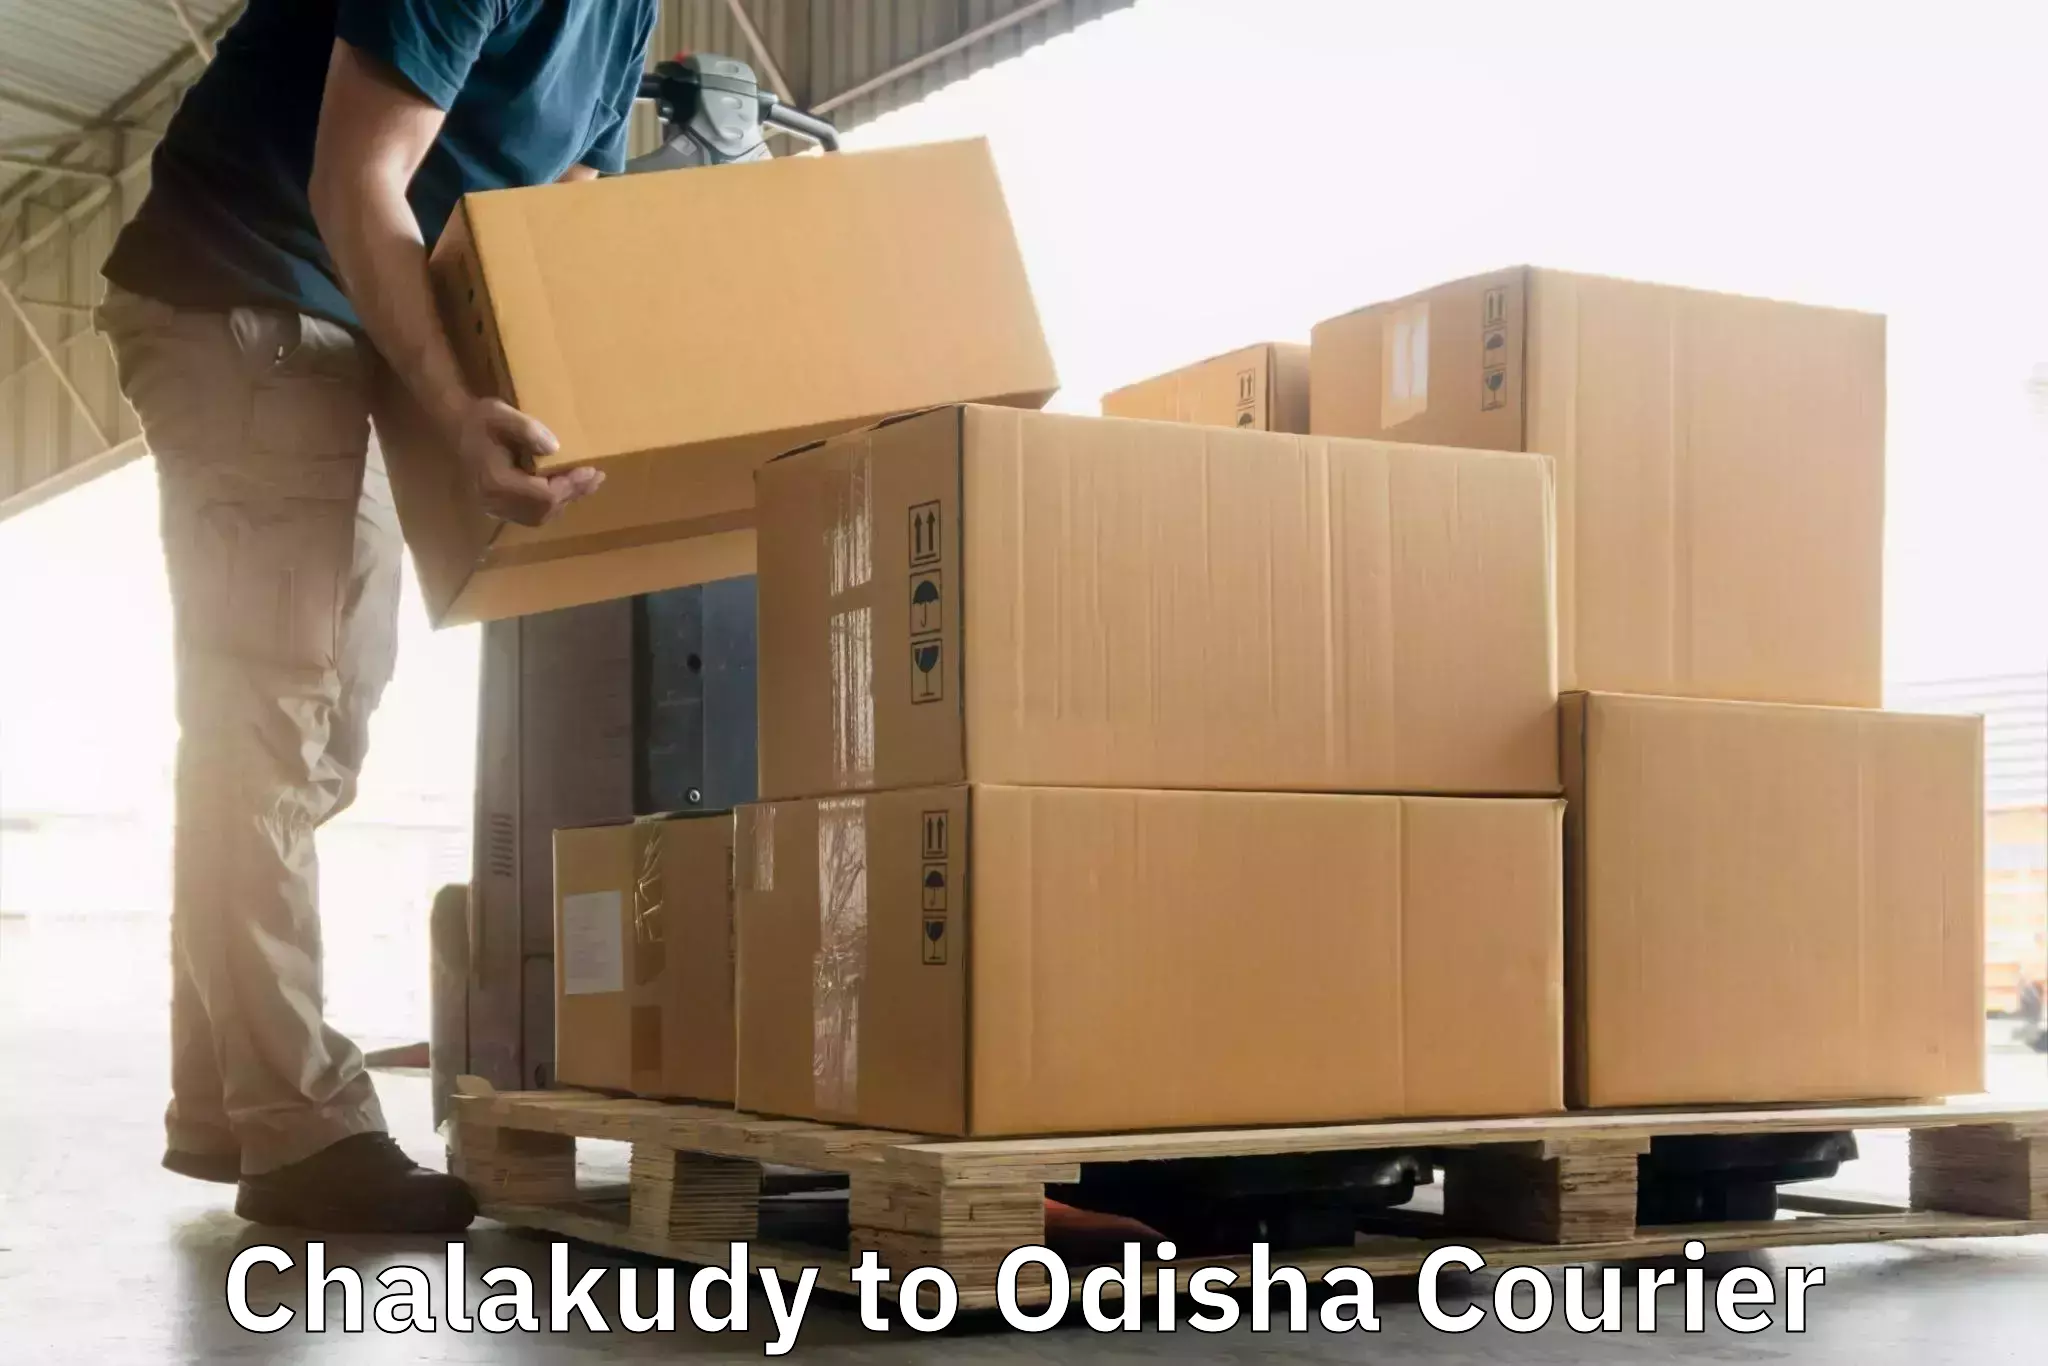 Flexible delivery schedules Chalakudy to Puranakatak